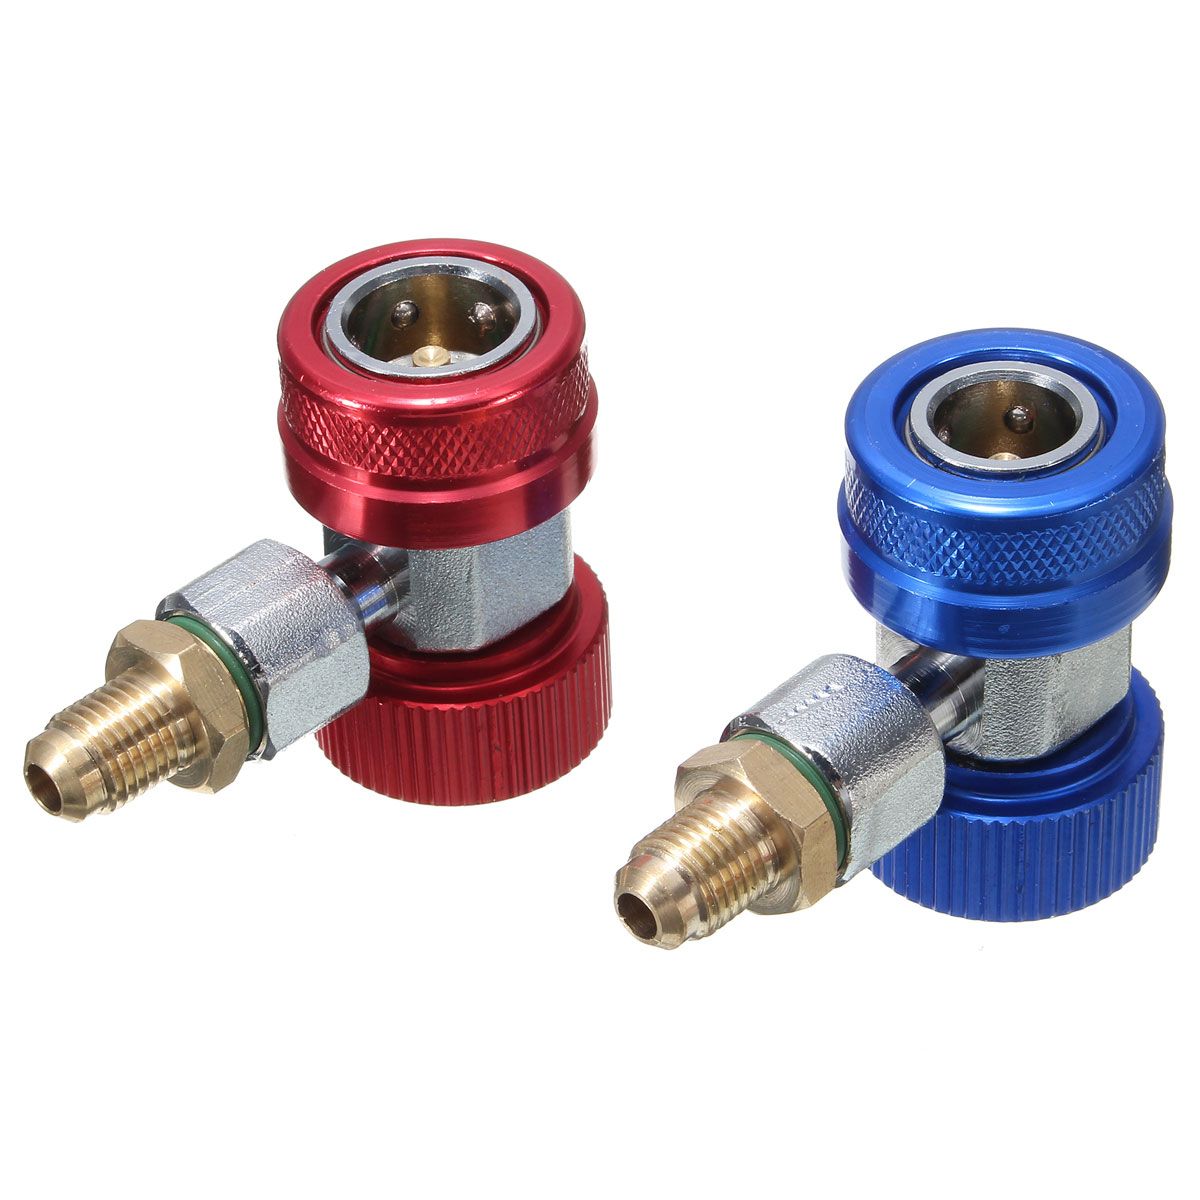 Adapter-R134A-Quick-Coupler-90deg-Low-amp-High-Side-AC-Manifold-Extractor-Valve-Core-1305516